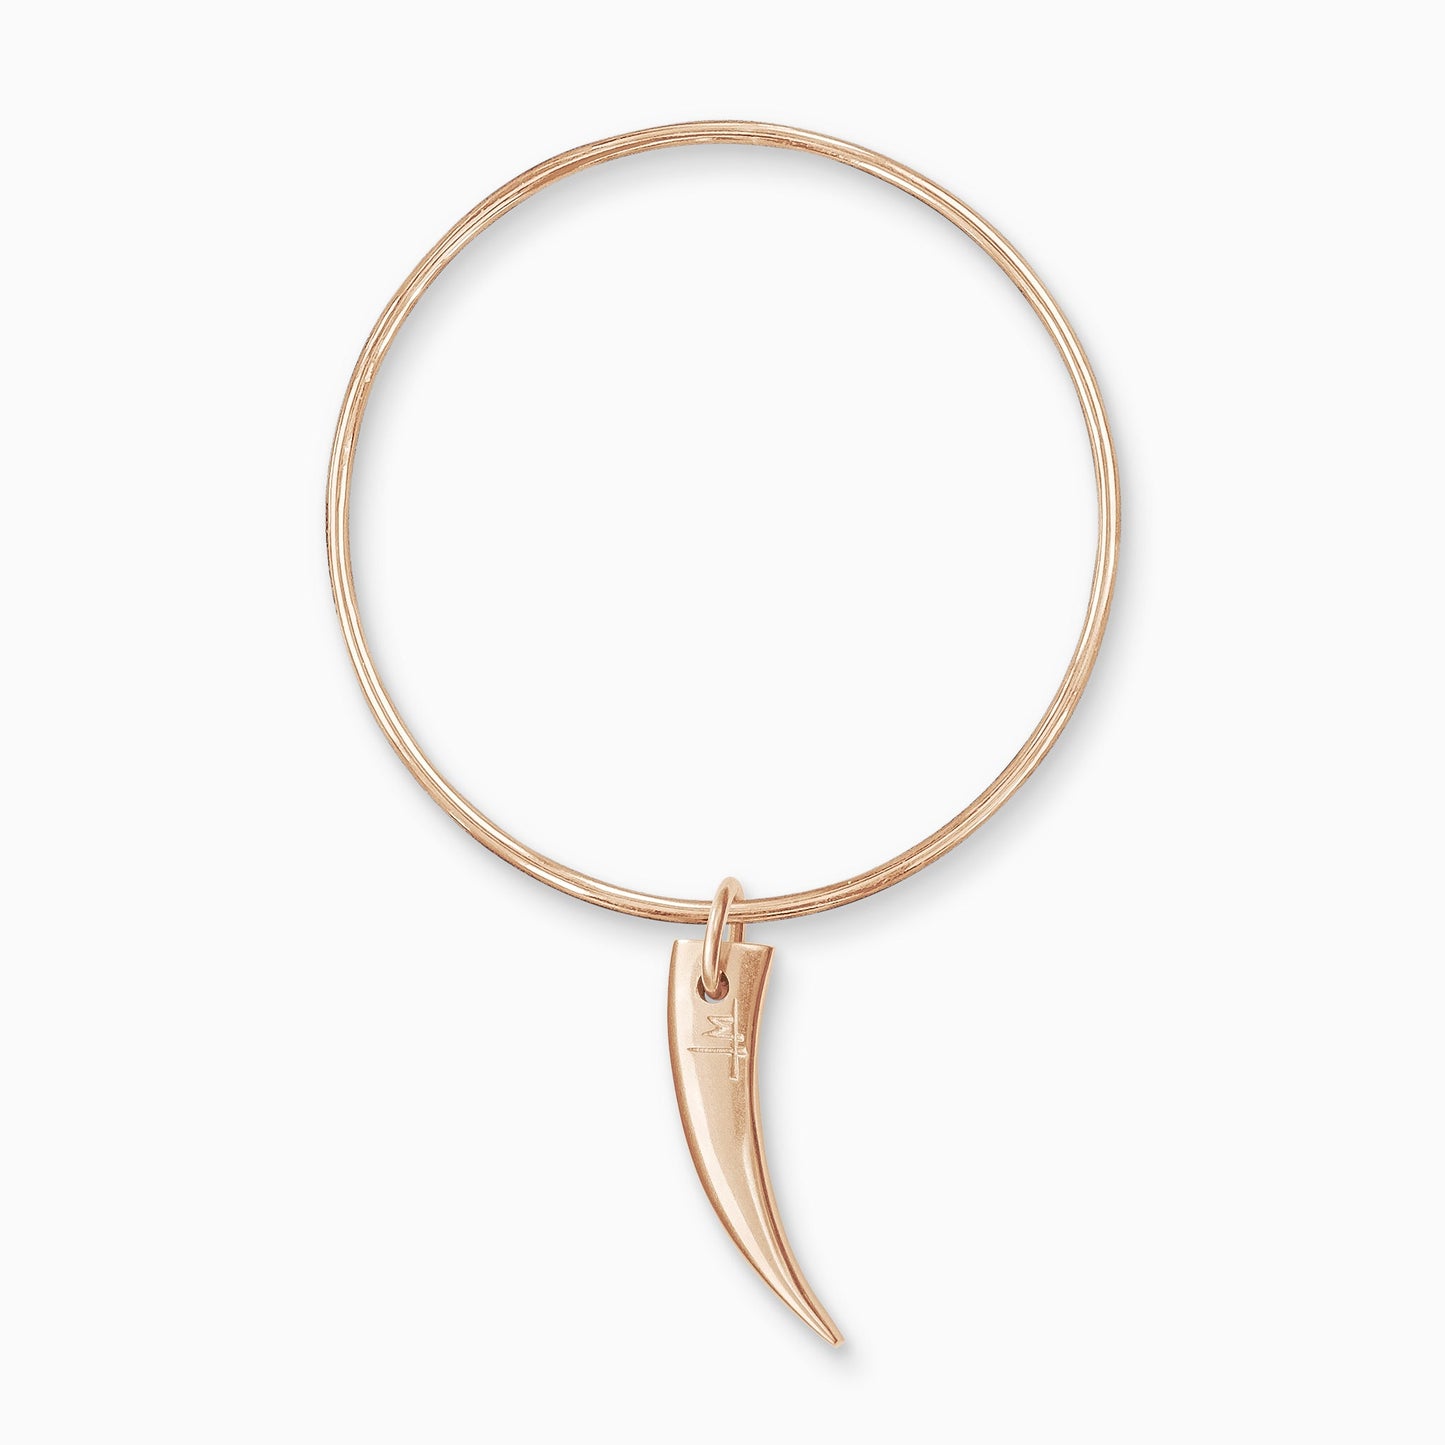 An 18ct Fairtrade rose gold smooth, tusk shaped charm, freely moving on a round wire bangle.  Charm 63mm. Bangle 63mm inside diameter x 2mm round wire.